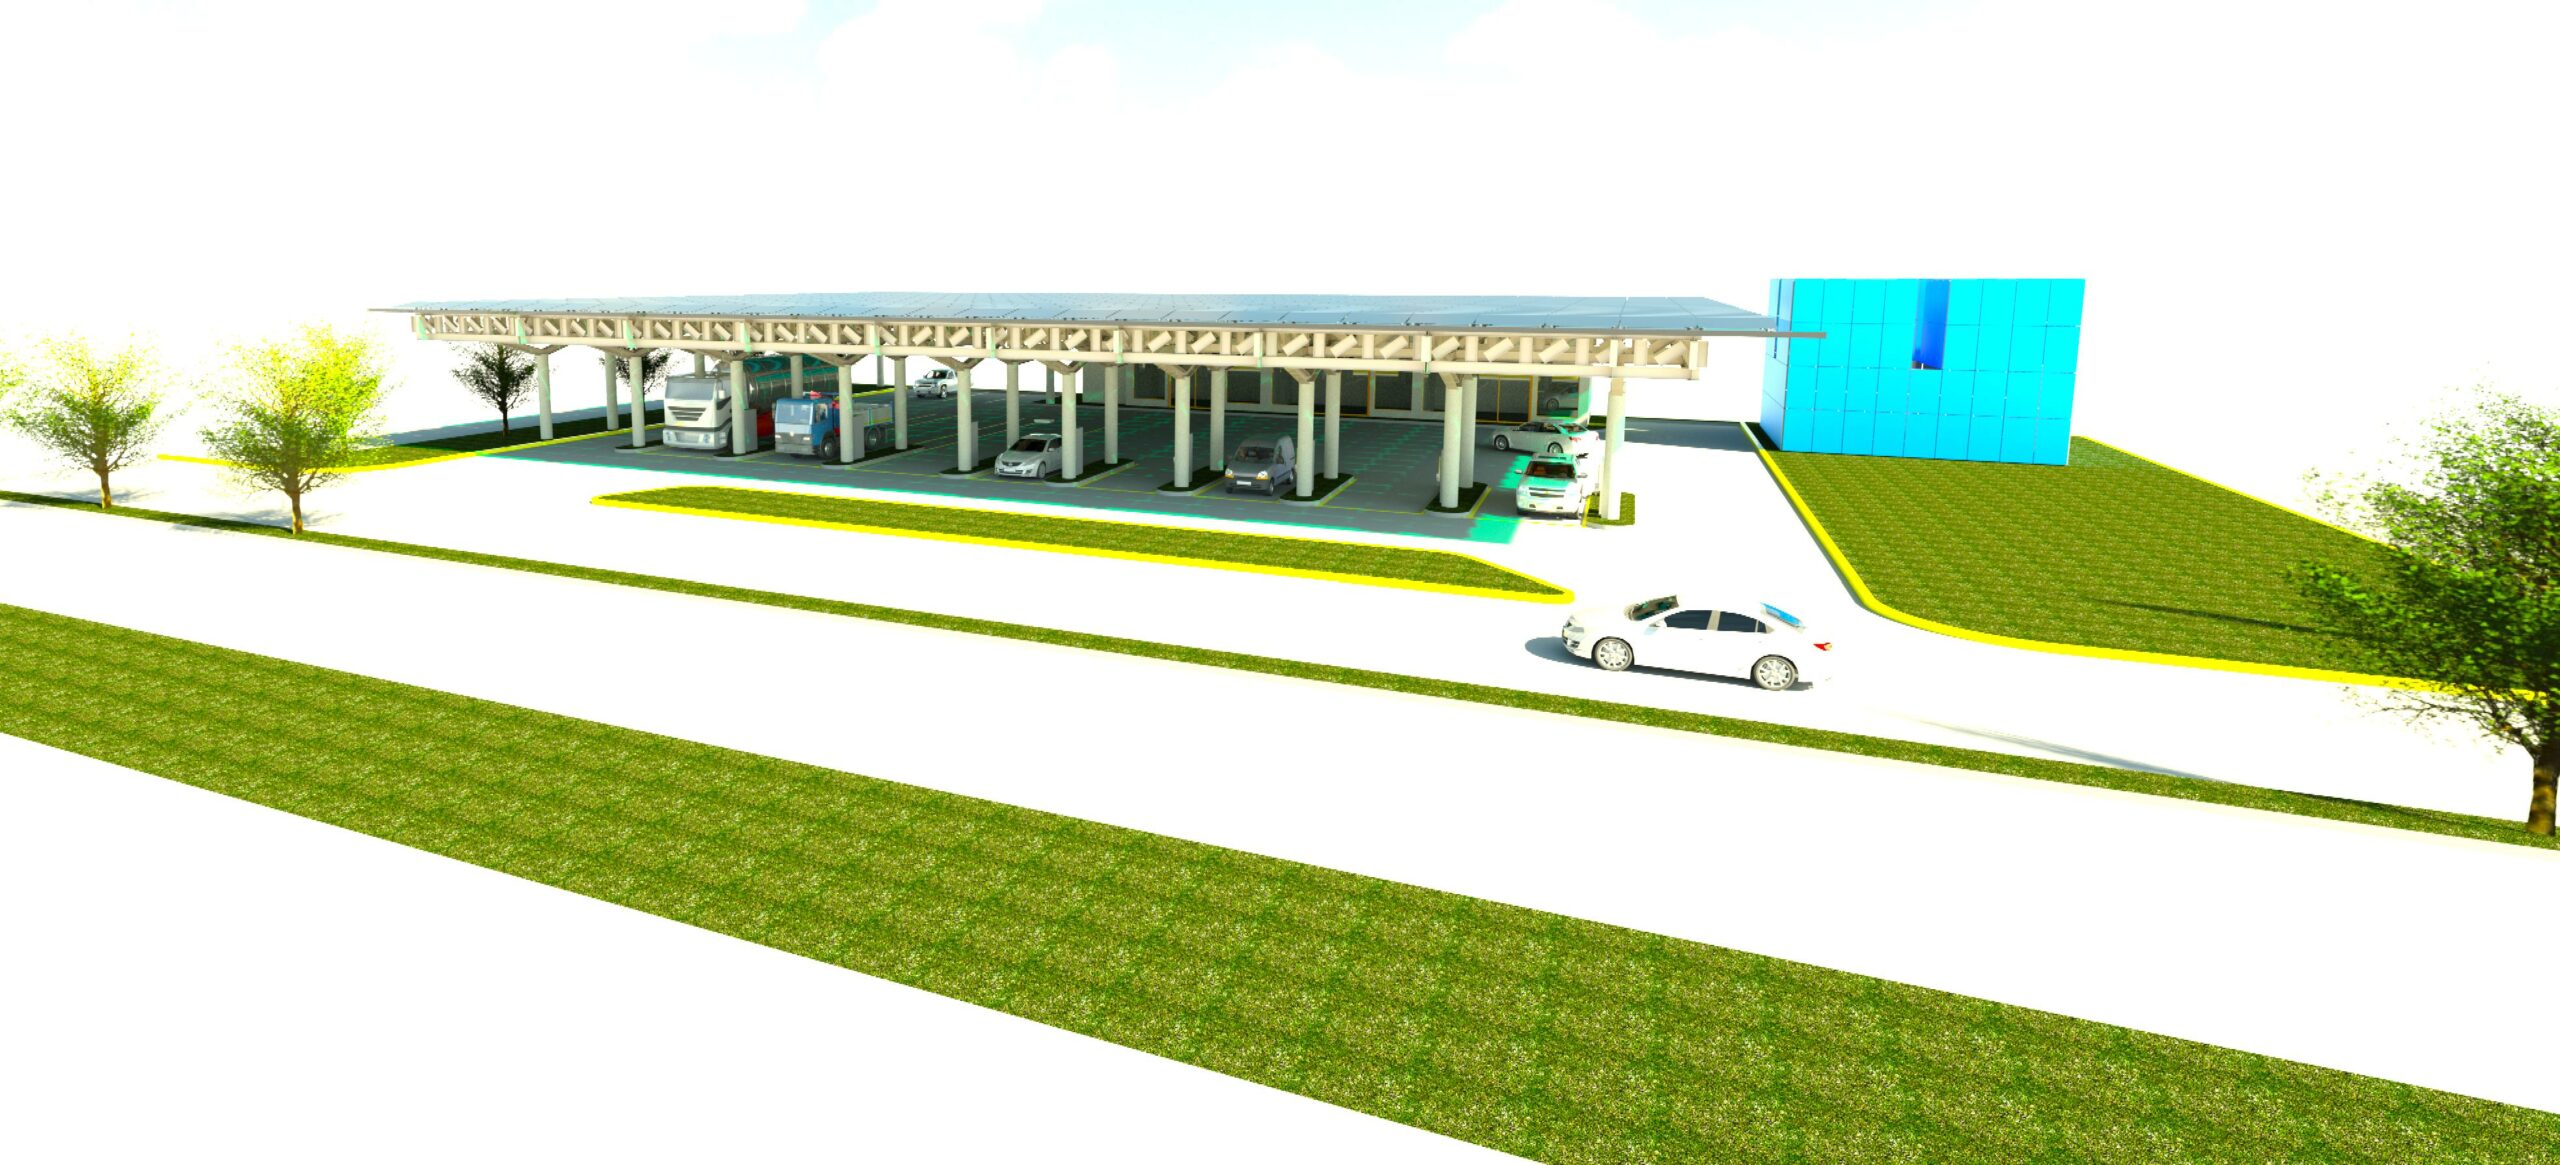 Energy and Water Development (EAWD) announces its construction of Europe’s first Off-Grid eCharging park in Europe